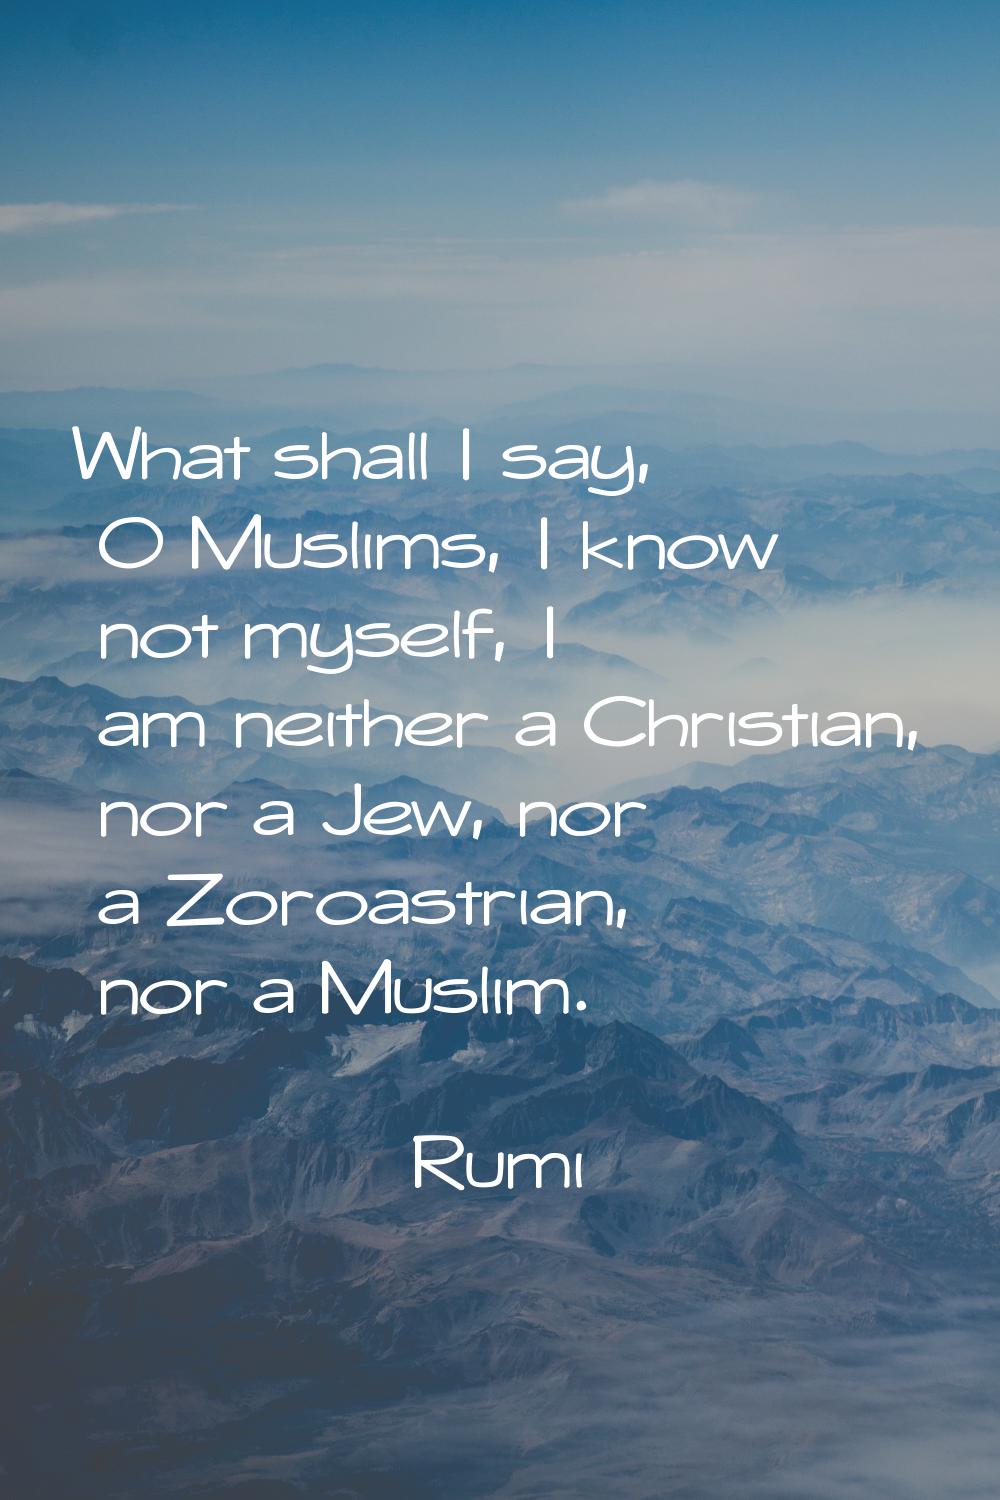 What shall I say, O Muslims, I know not myself, I am neither a Christian, nor a Jew, nor a Zoroastr